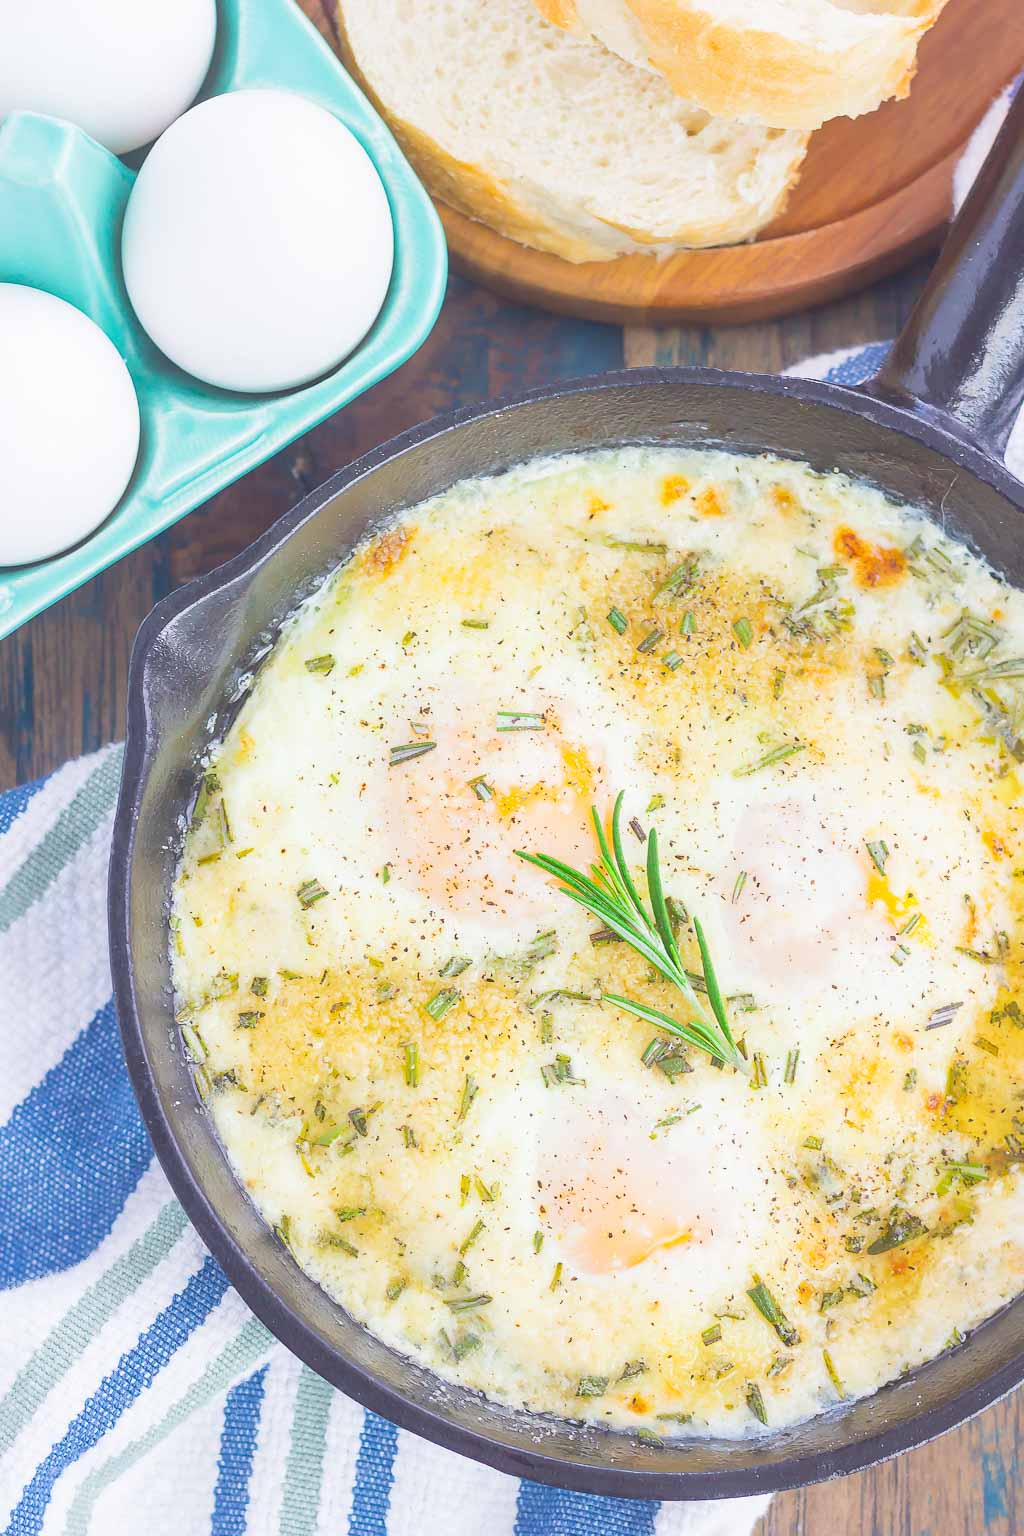 Baked Eggs with Rosemary and Thyme make a simple breakfast that's loaded with flavor. Fresh herbs and a sprinkling of cheese give this dish a savory blend that's perfect for a cozy dish. Serve with a side of crusty bread and this will quickly become a new favorite!